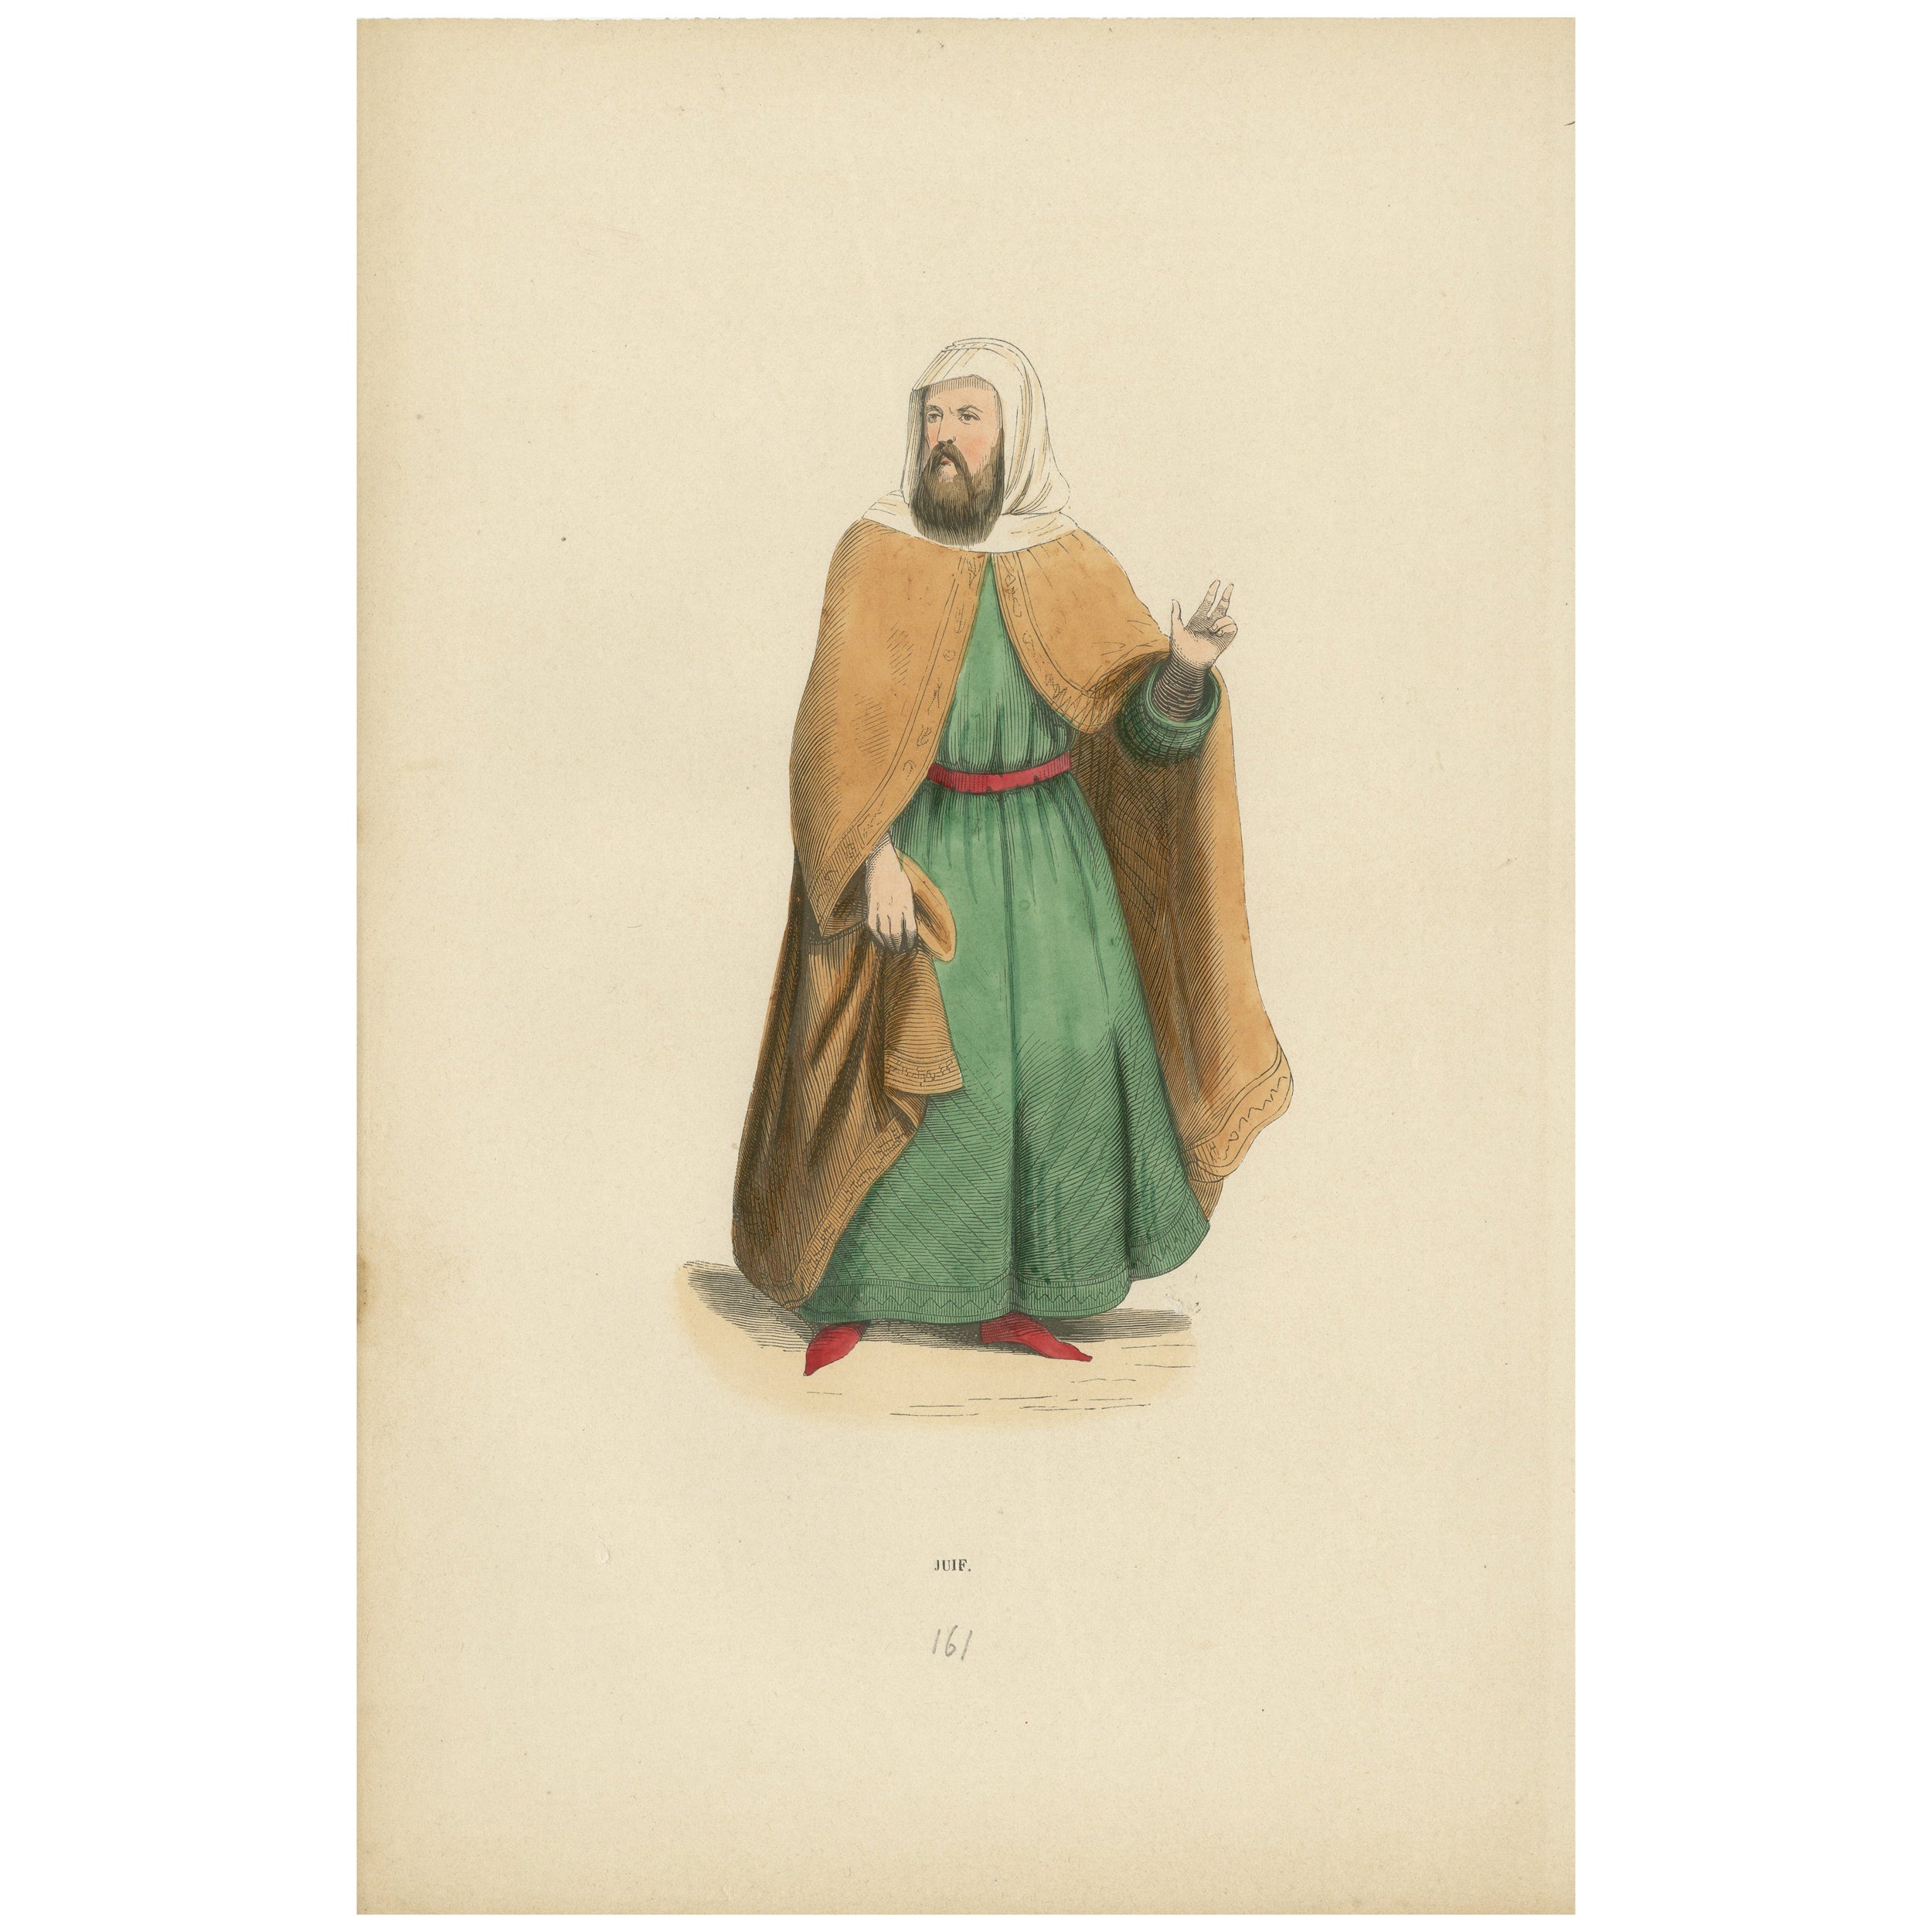 Emissary of Tradition: Portrait of a Jewish Scholar from the Past, 1847